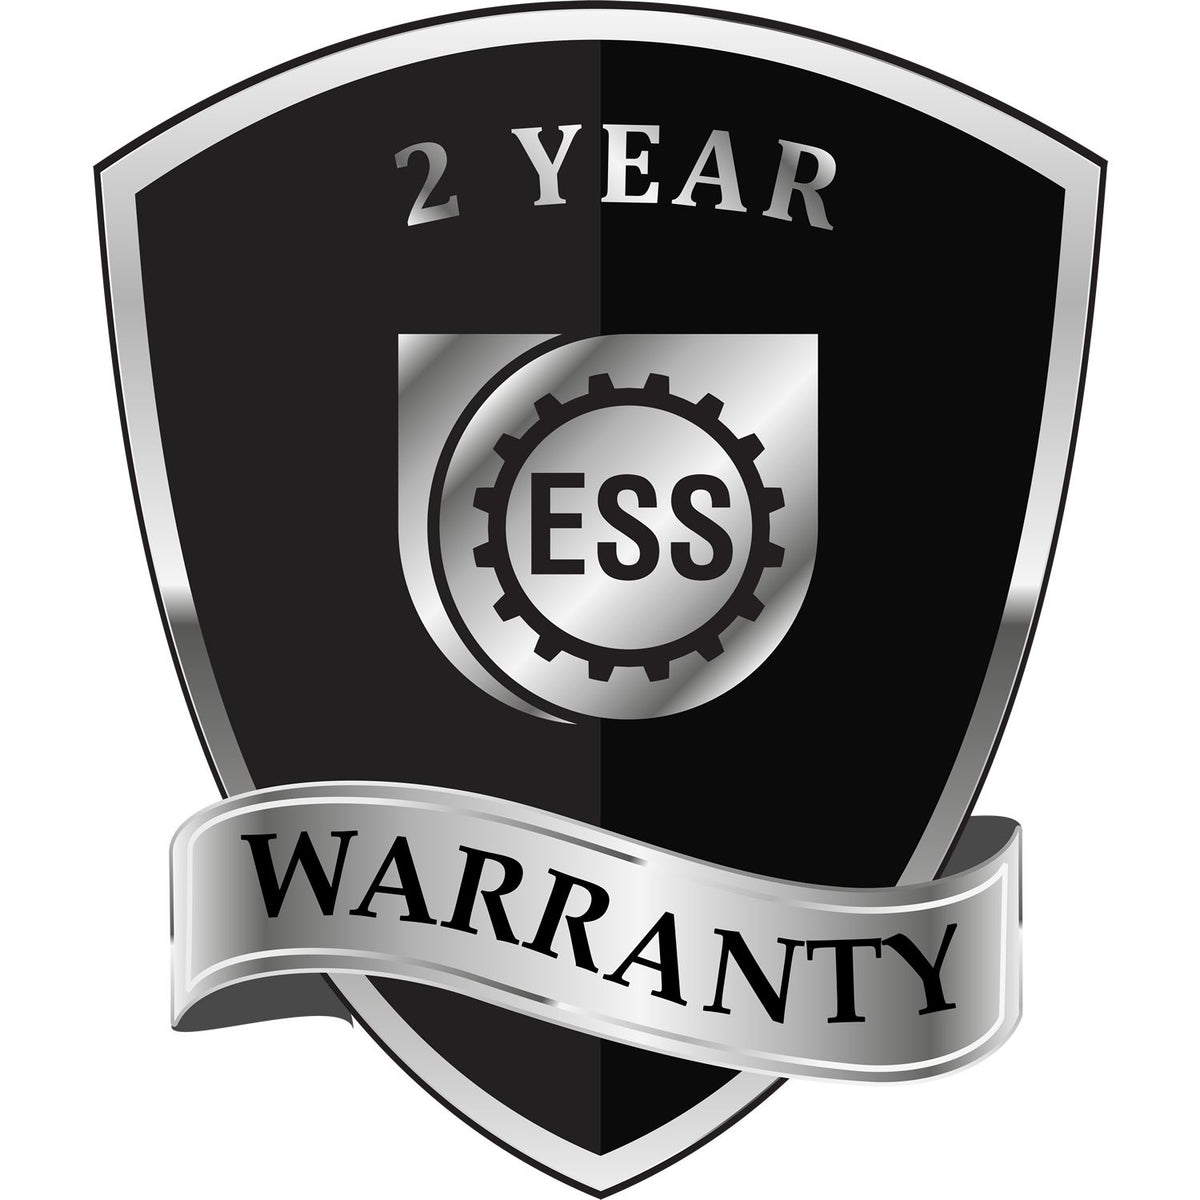 A badge or emblem showing a warranty icon for the State of Idaho Extended Long Reach Engineer Seal